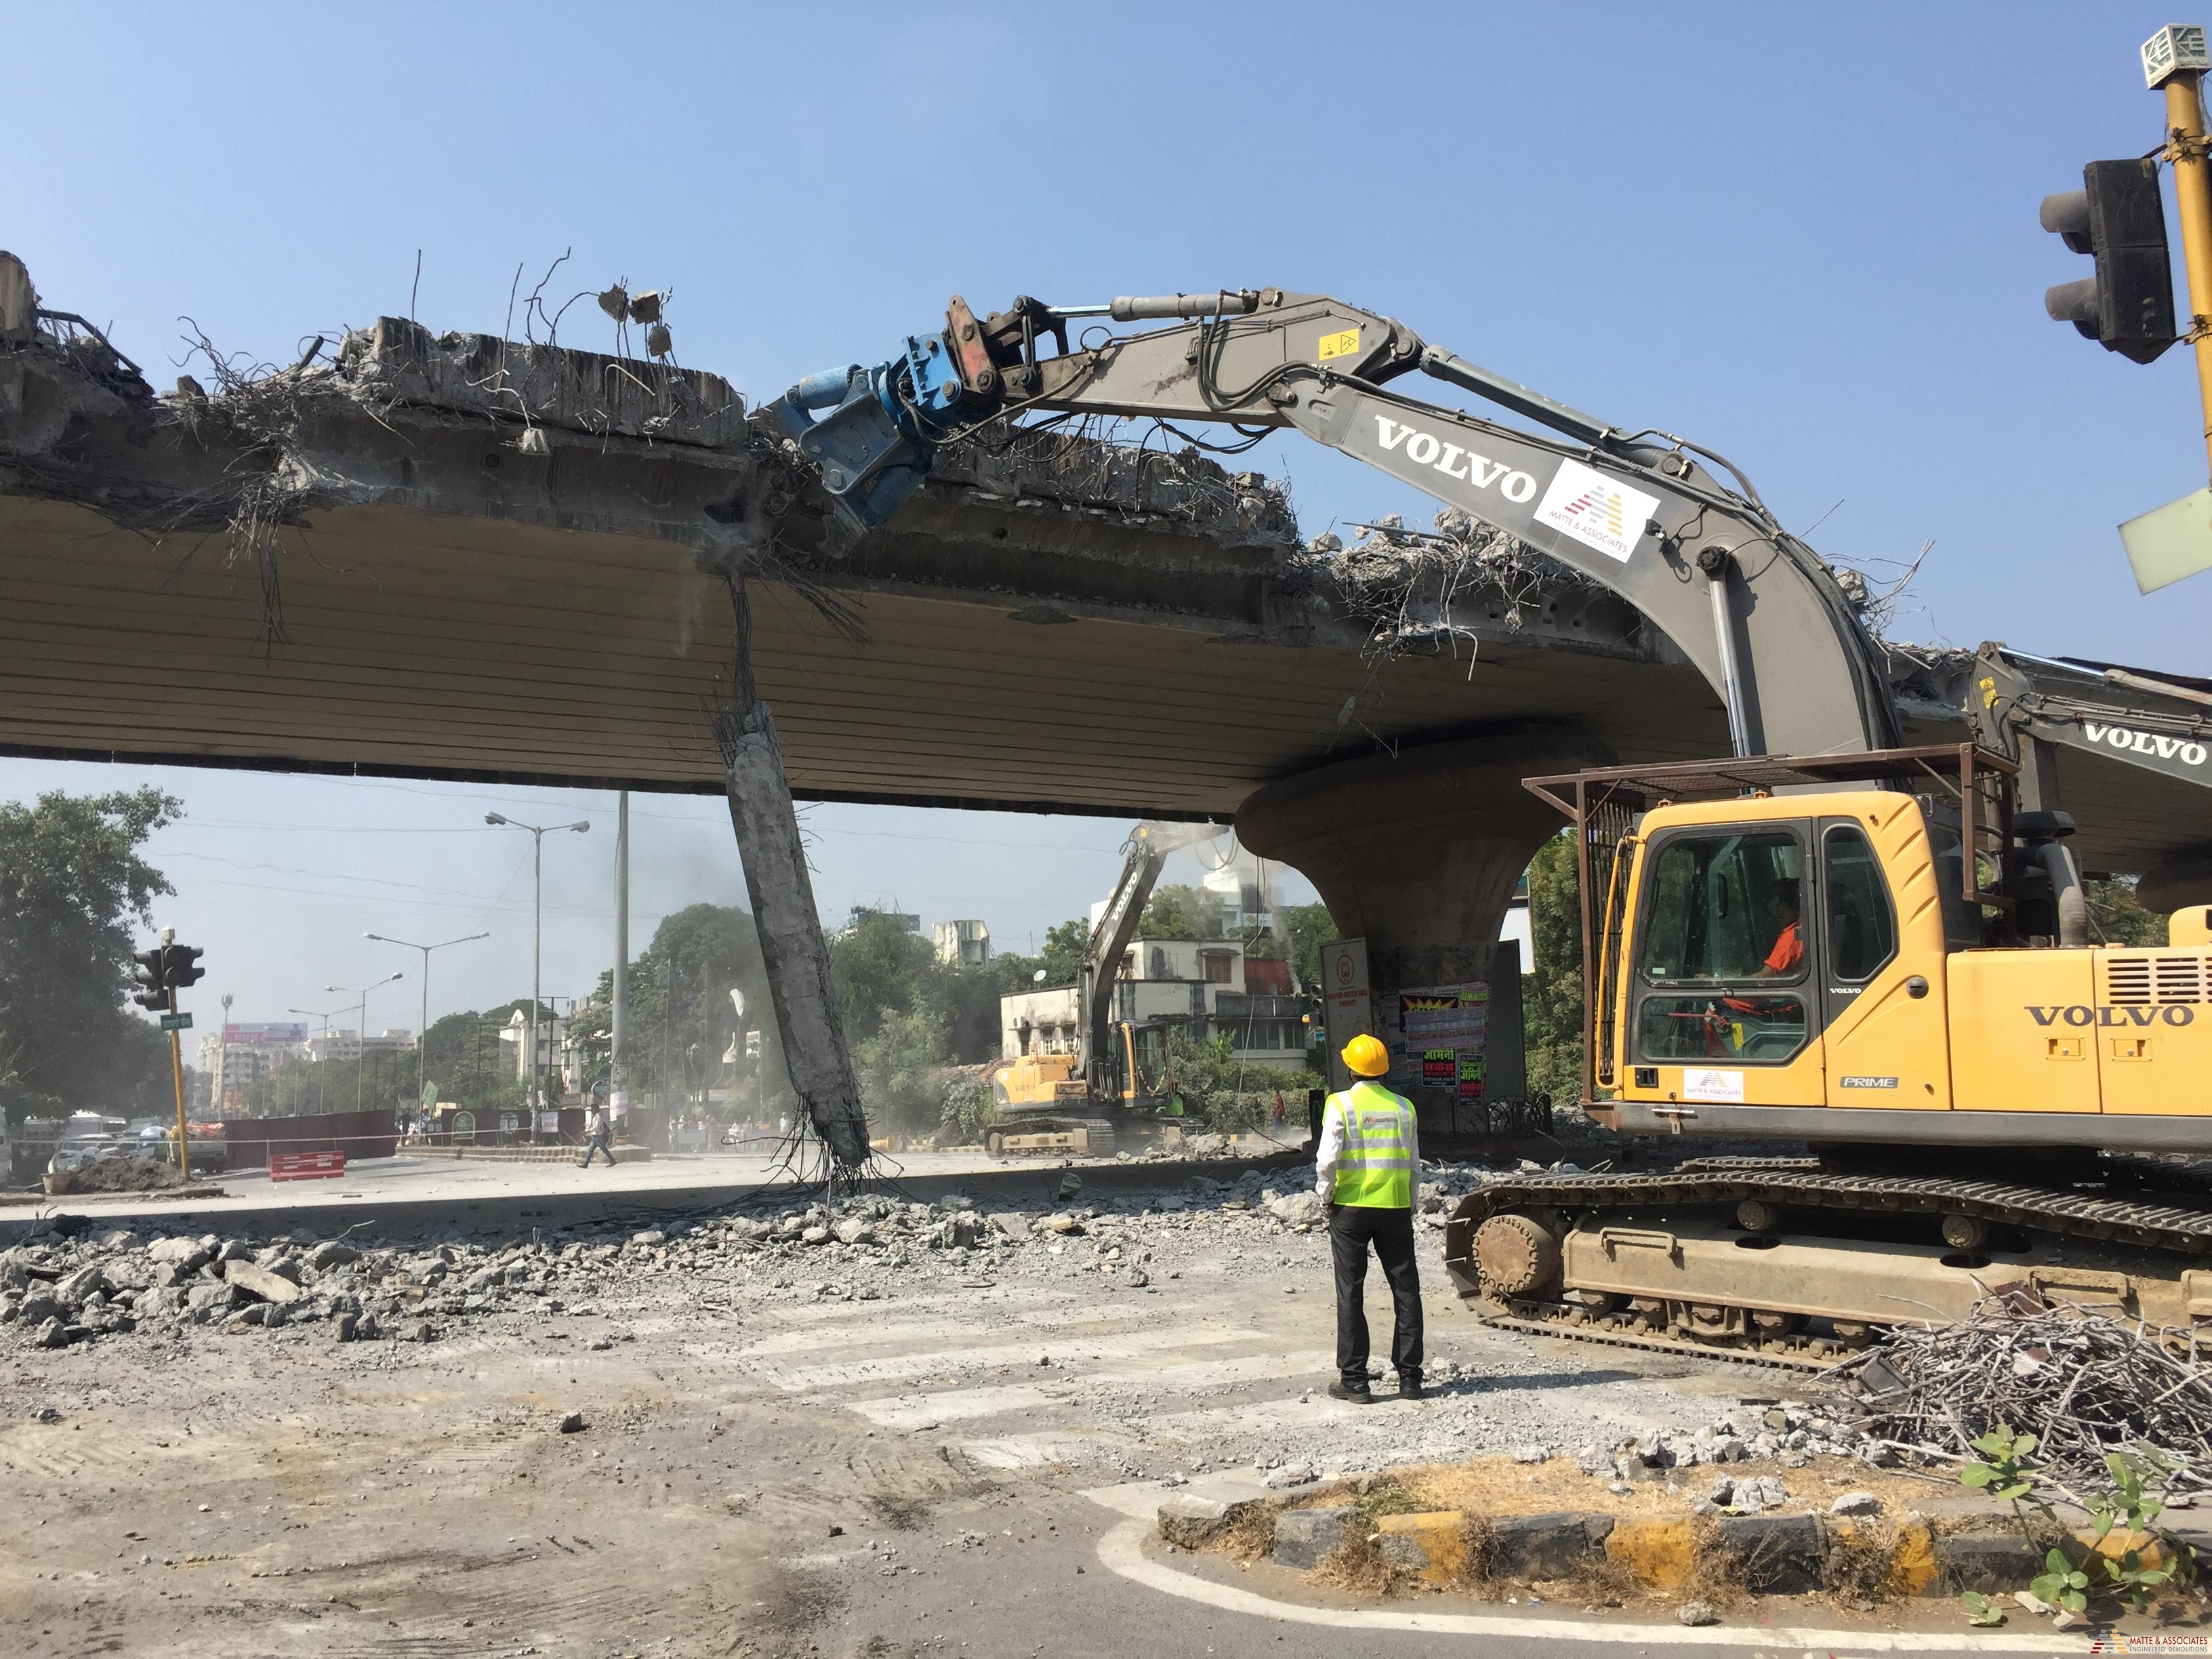 LARGE SCALE HYDRAULIC CONCRETE CRUSHING AND BREAKING